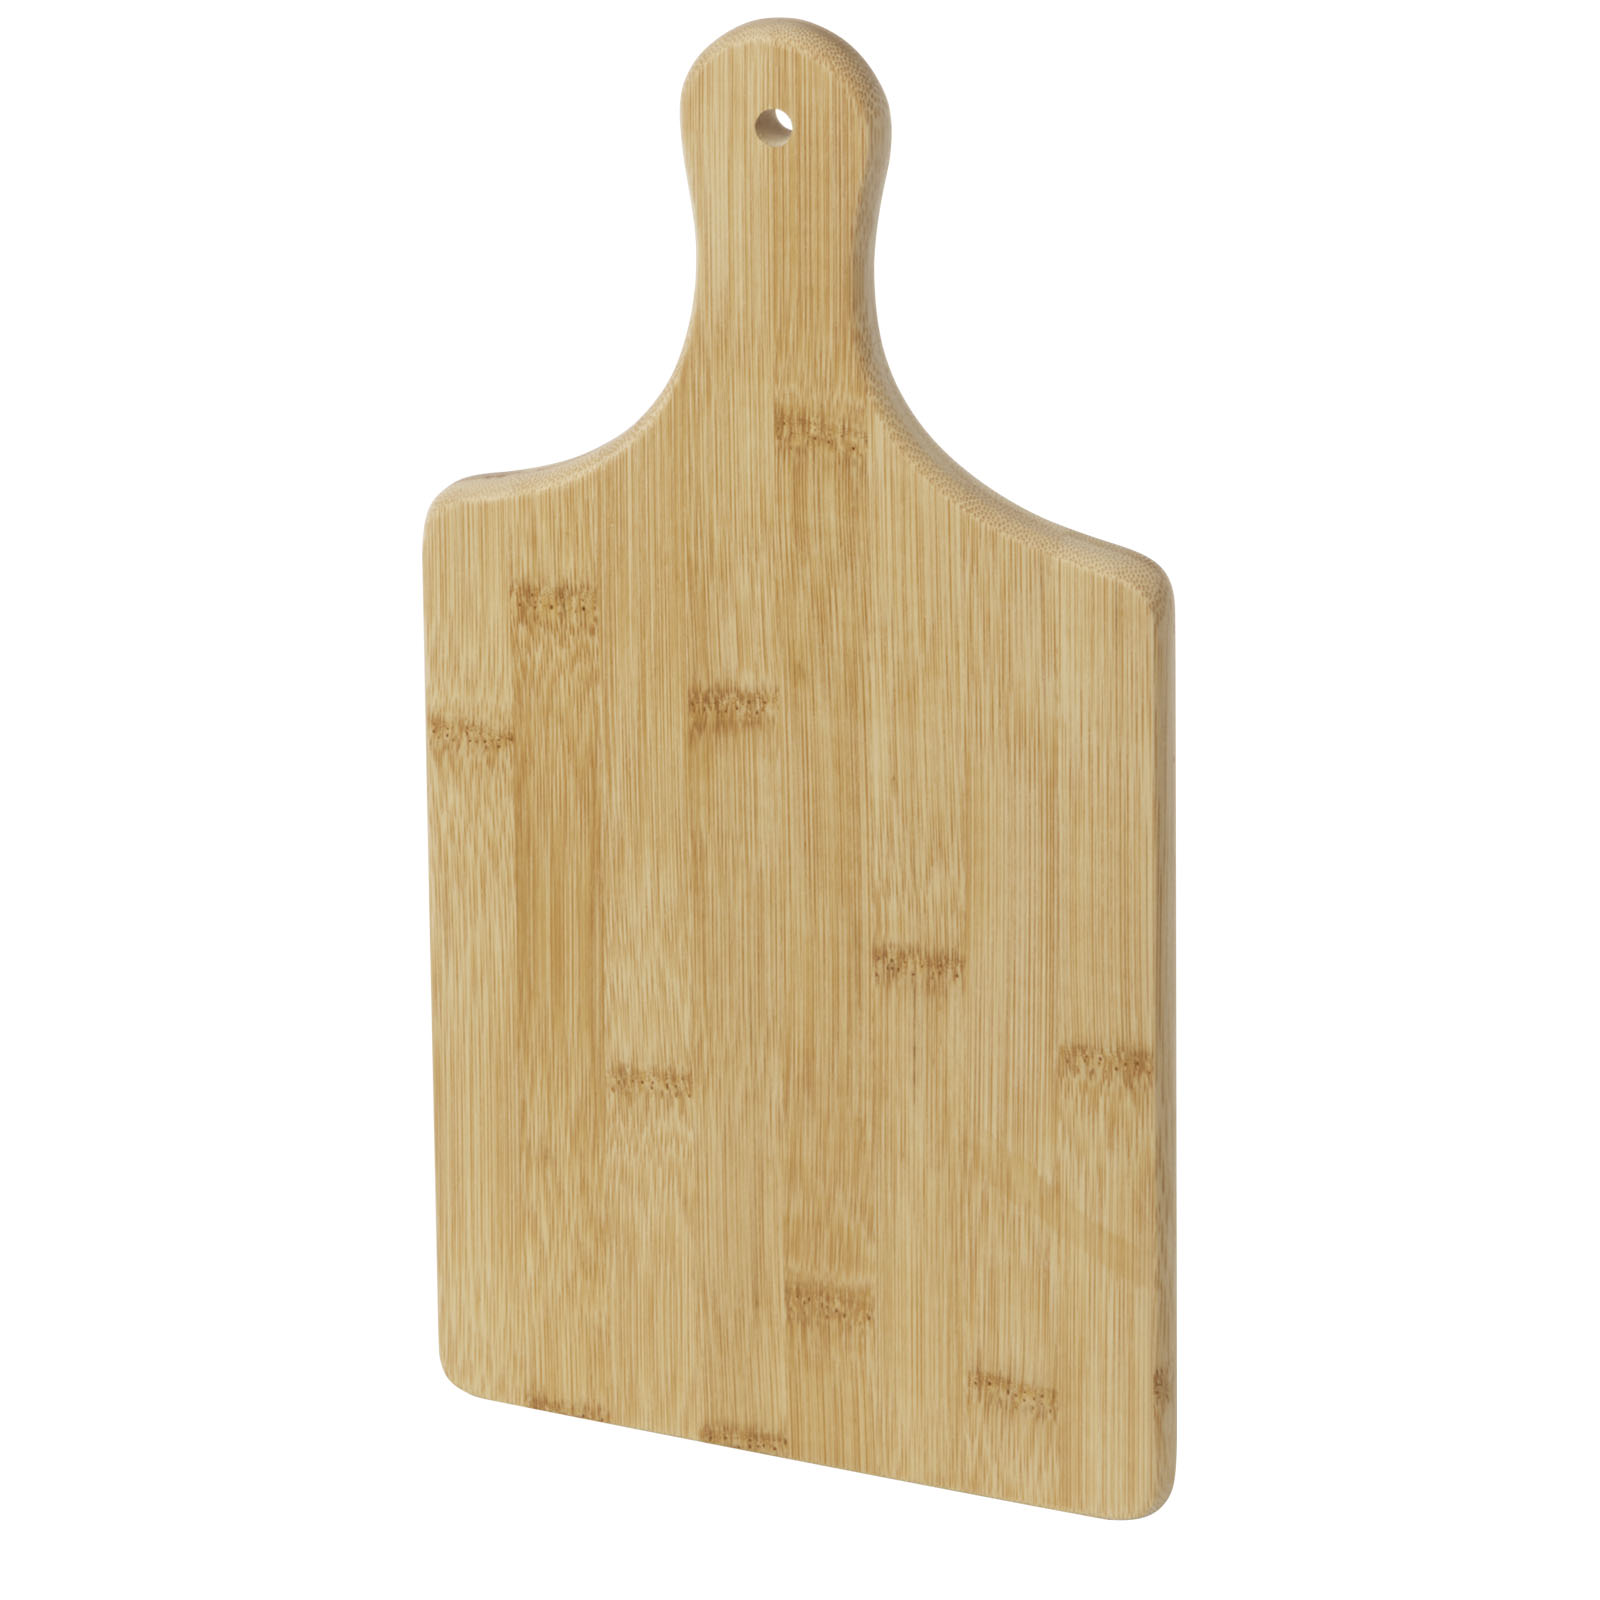 Advertising Cutting Boards - Quimet bamboo cutting board - 4